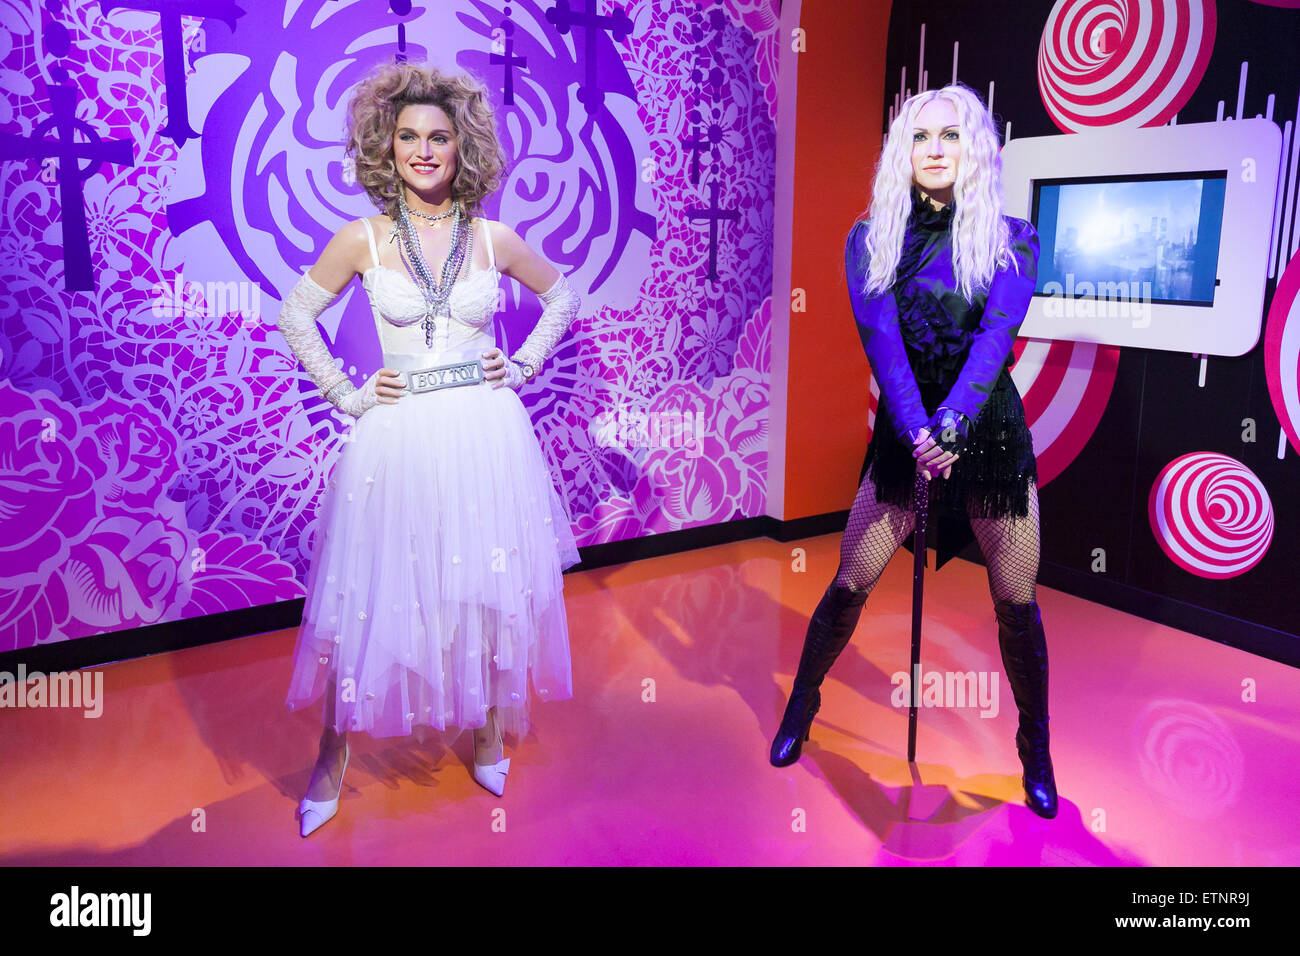 Wax figures of Madonna, American singer, songwriter, actress and businesswoman on display at the Madame Tussauds Tokyo wax museum in Odaiba, Tokyo, June 15, 2015. The world famous British wax museum ''Madame Tussauds'' opened its 14th permanent branch in Tokyo in 2013 and exhibits international and local celebrities, sports players and politicians. New additions to the collection include wax figures of the Japanese figure skater Yuzuru Hanyu and the actor Benedict Cumberbatch. The wax figure of Benedict Cumberbatch will be exhibited until June 30th. (Photo by Rodrigo Reyes Marin/AFLO) Stock Photo